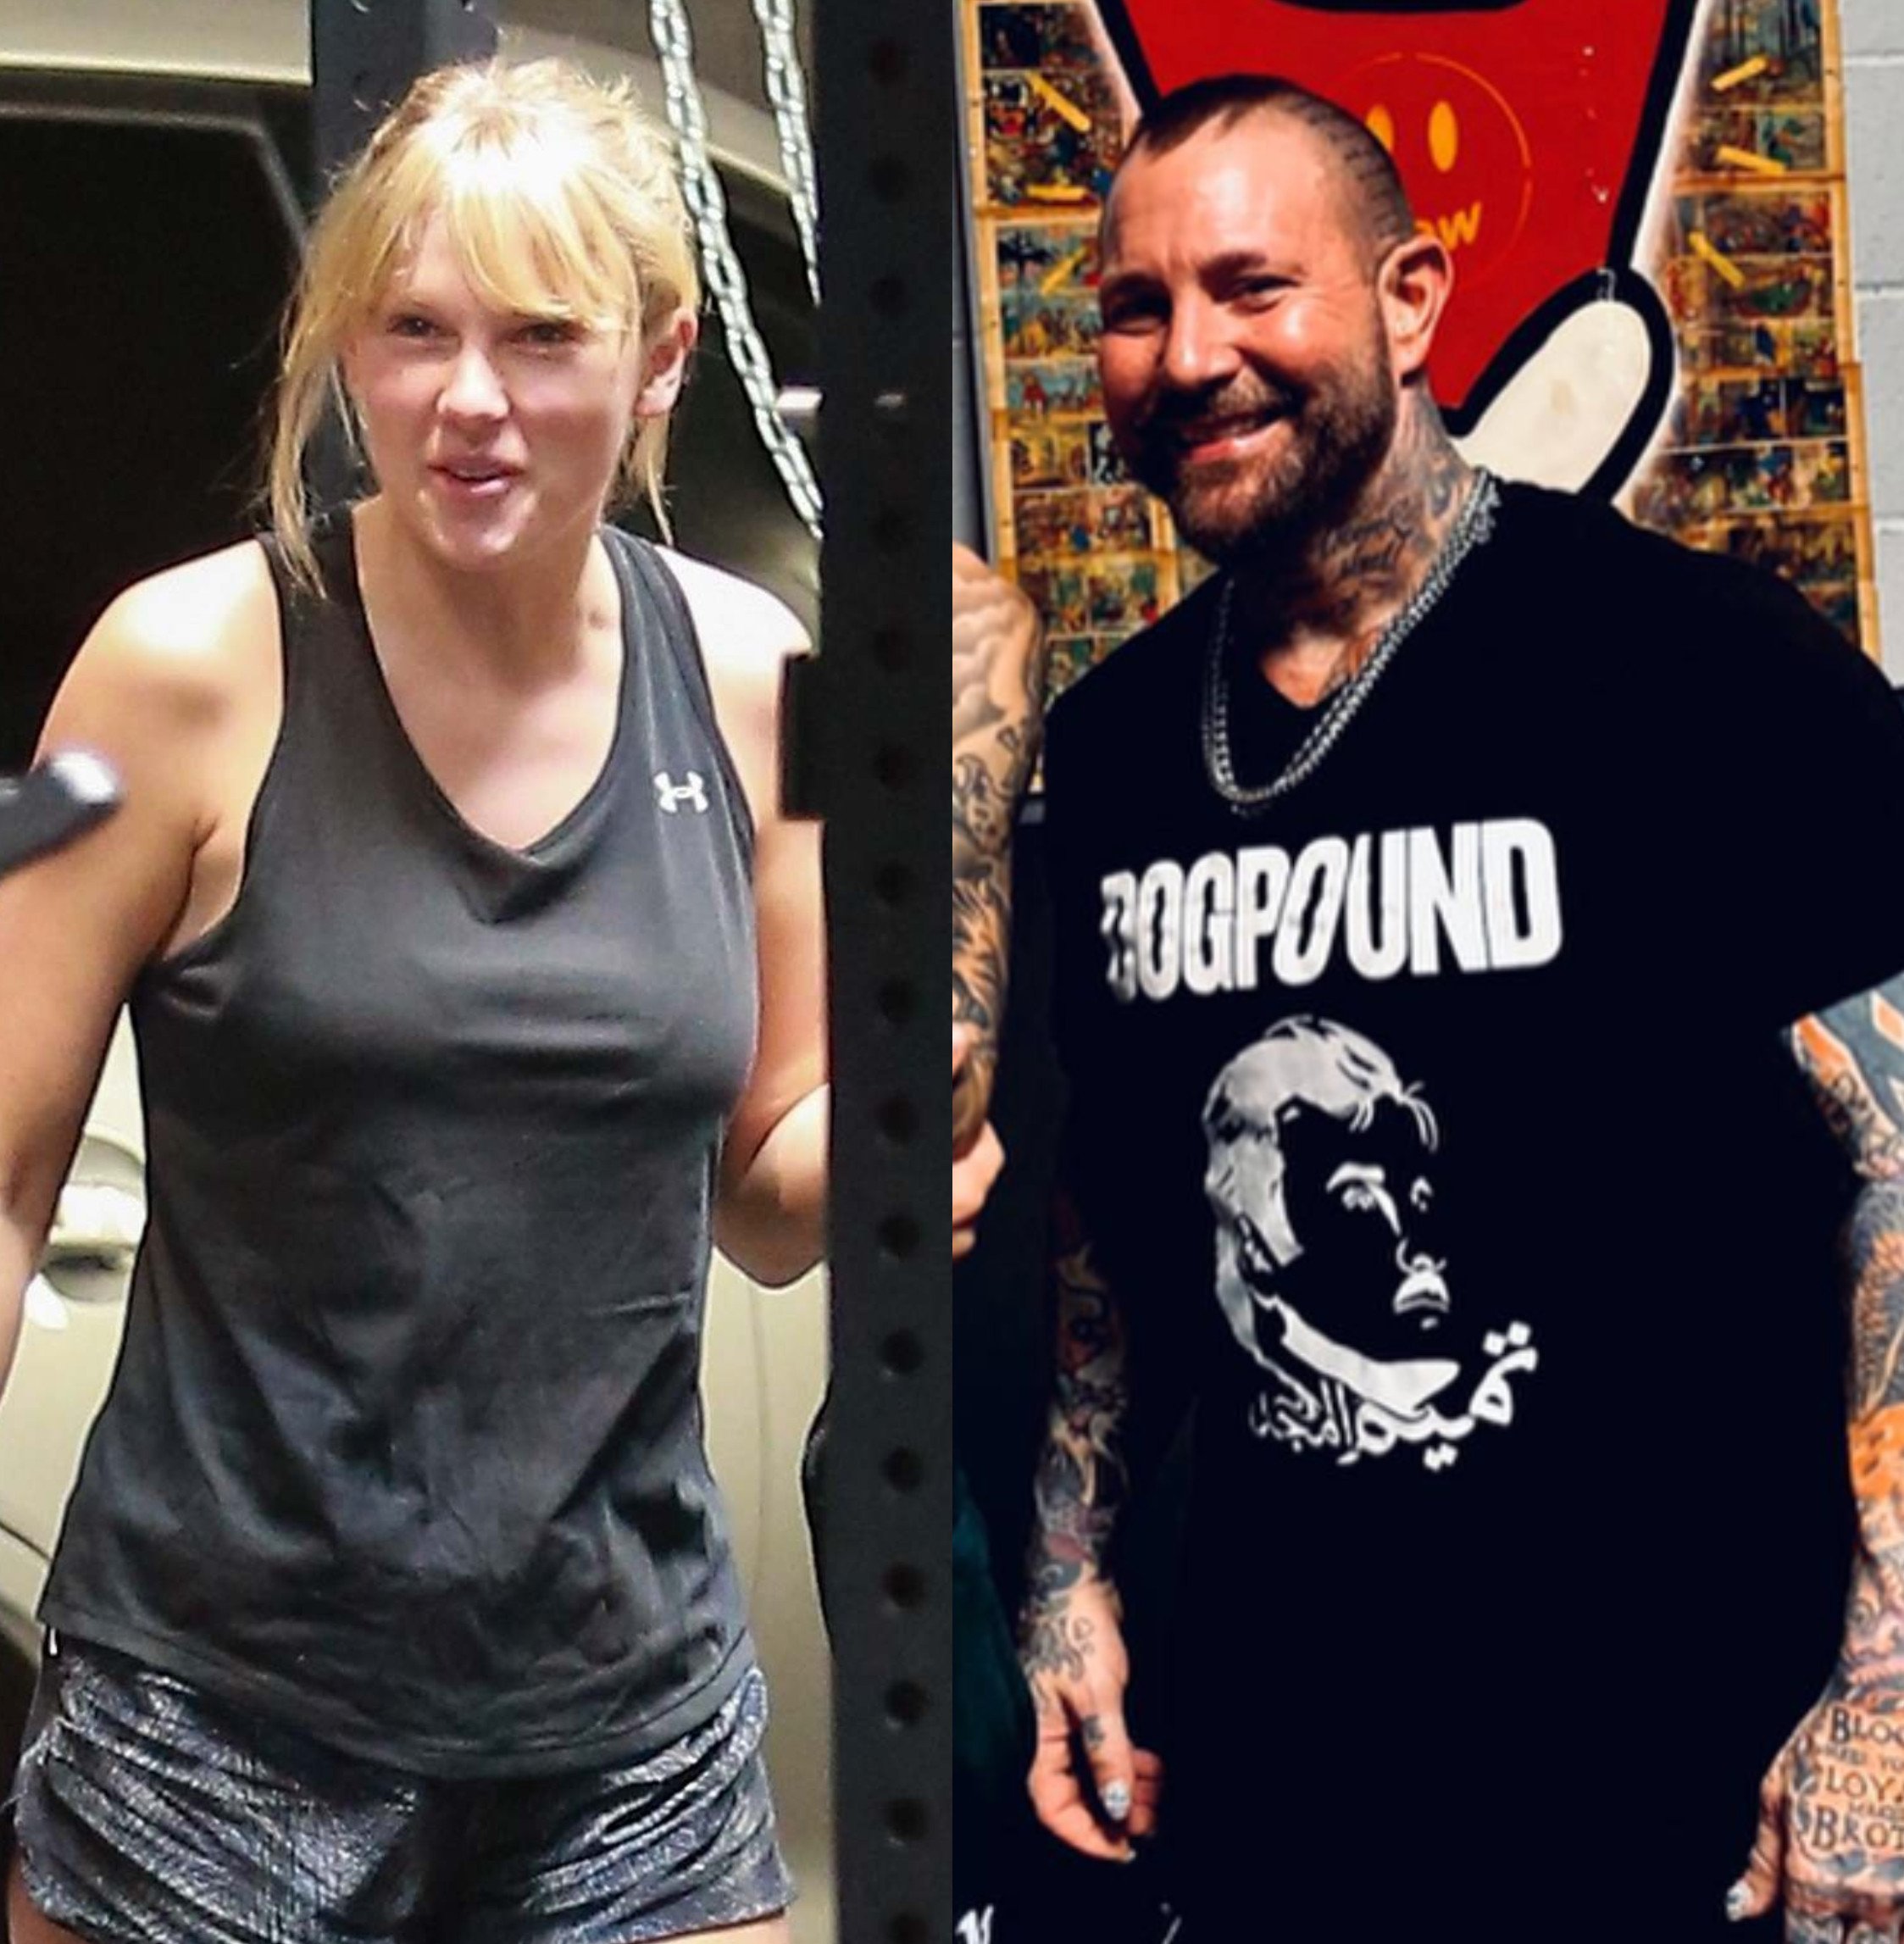 Taylor Swift gets tailored workouts from Kirk Myers, who founded the trendy Dogpound gym. Photos: @swiftupload/X, @kirkmyersfitness/Instagram